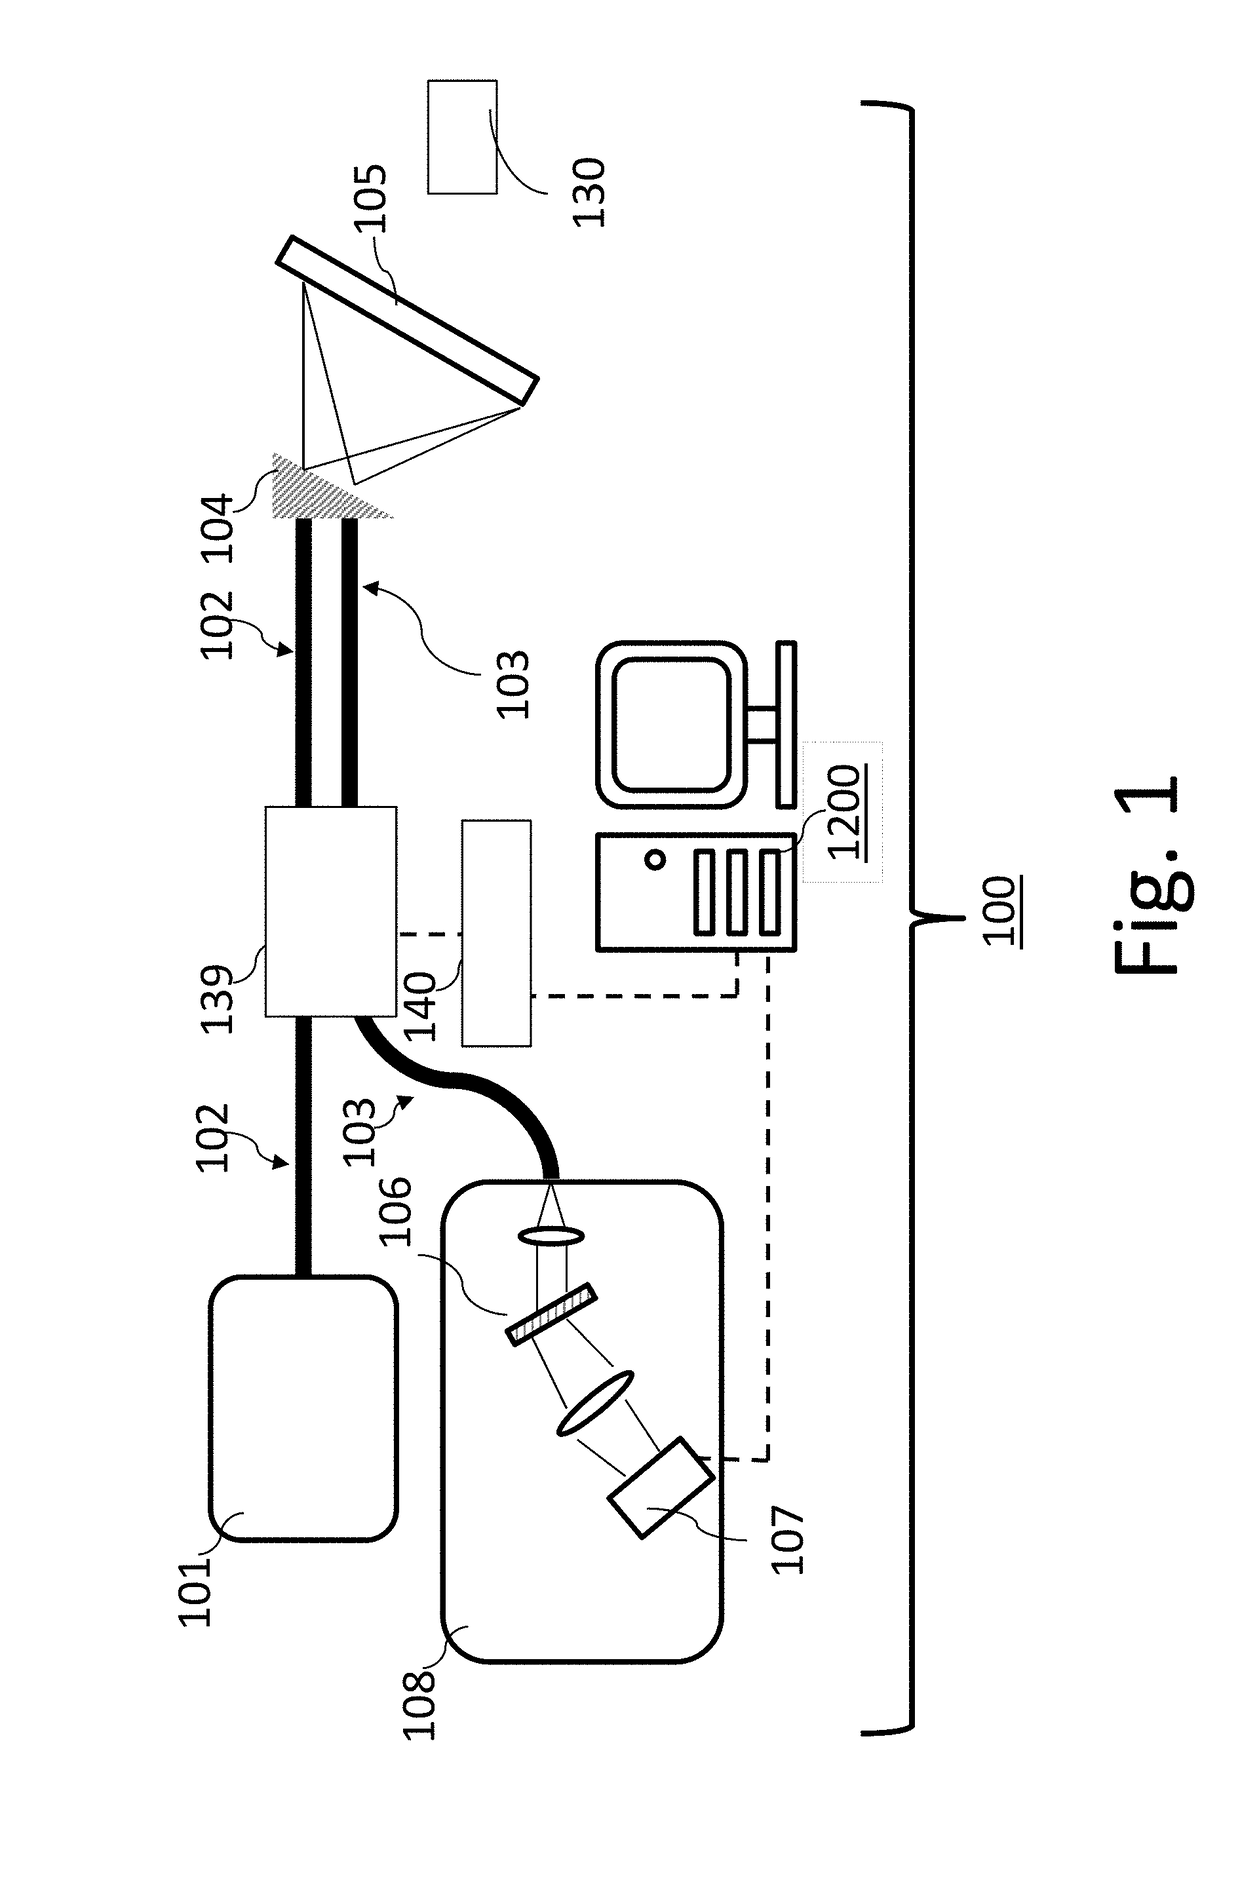 Diagnostic spectrally encoded endoscopy apparatuses and systems and methods for use with same